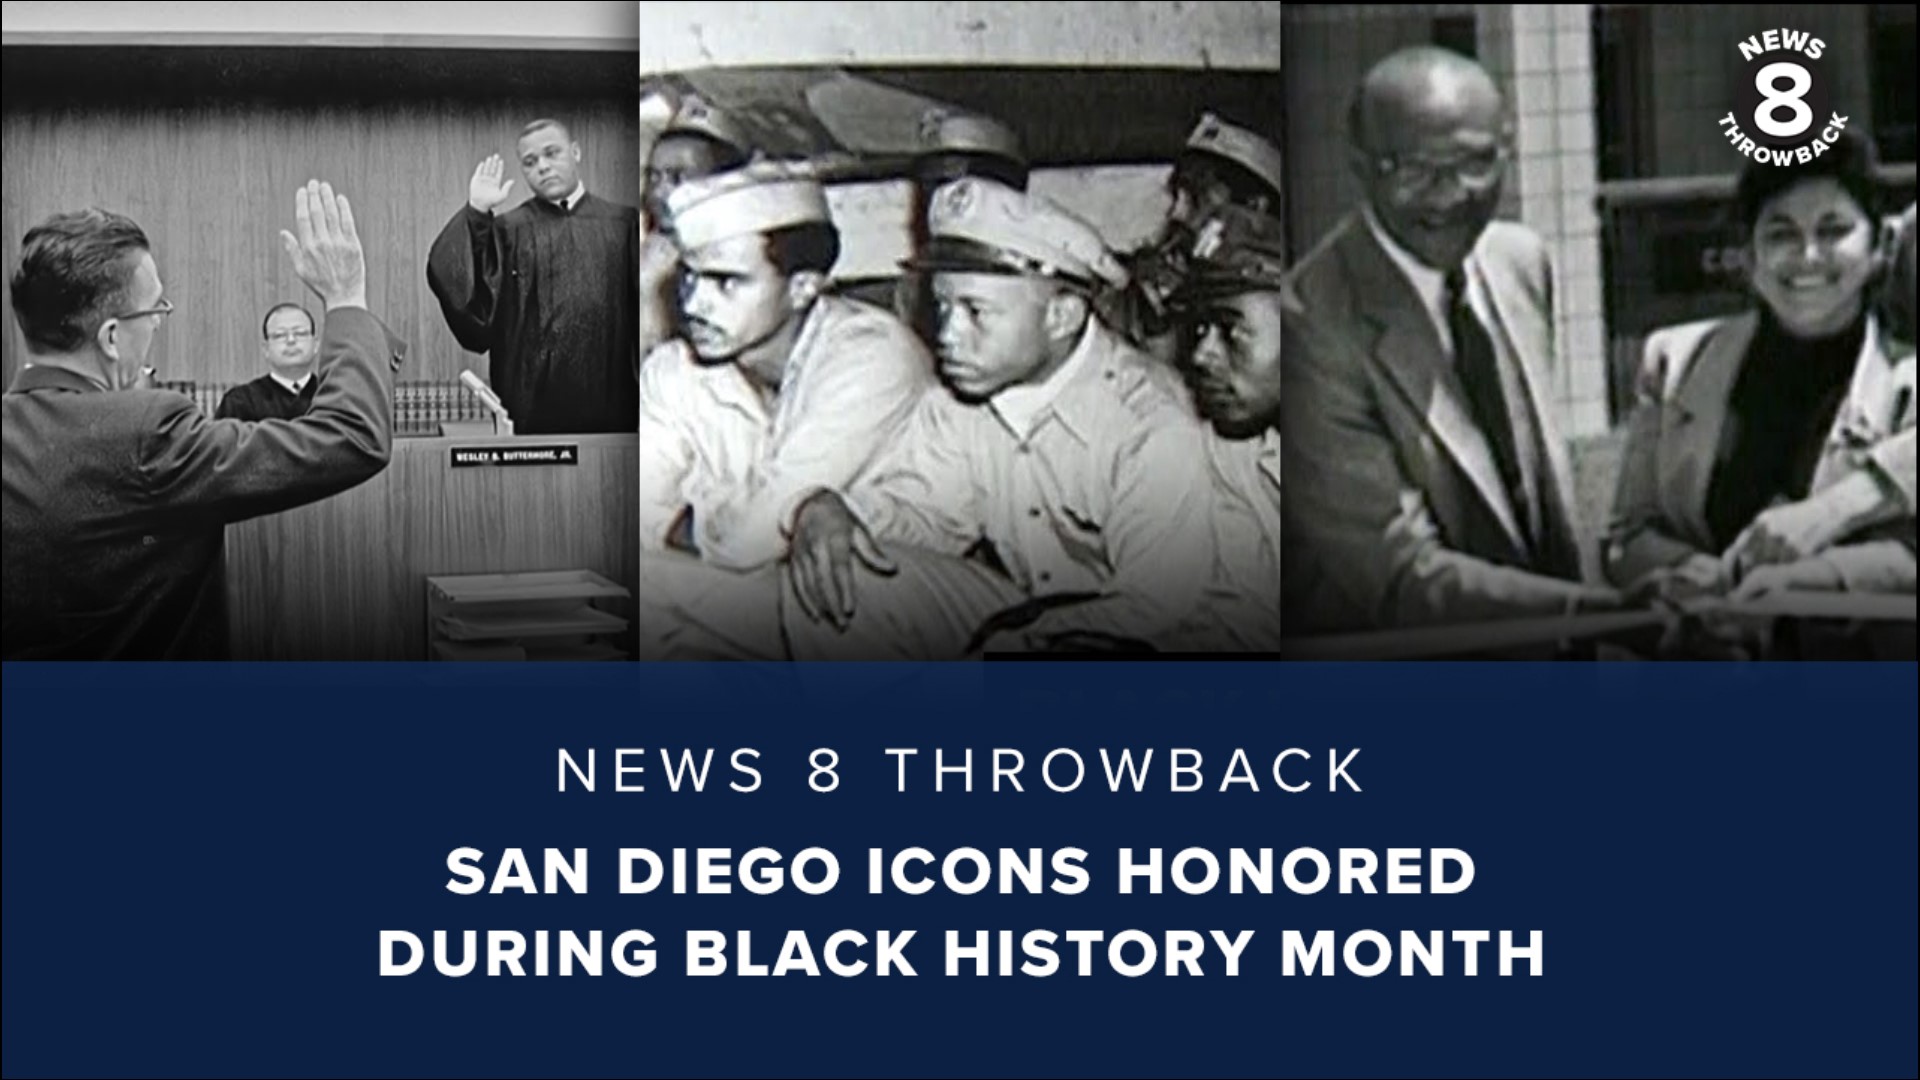 In this week’s News 8 Throwback we celebrate Black icons who served San Diego and the country in honor of Black History Month.